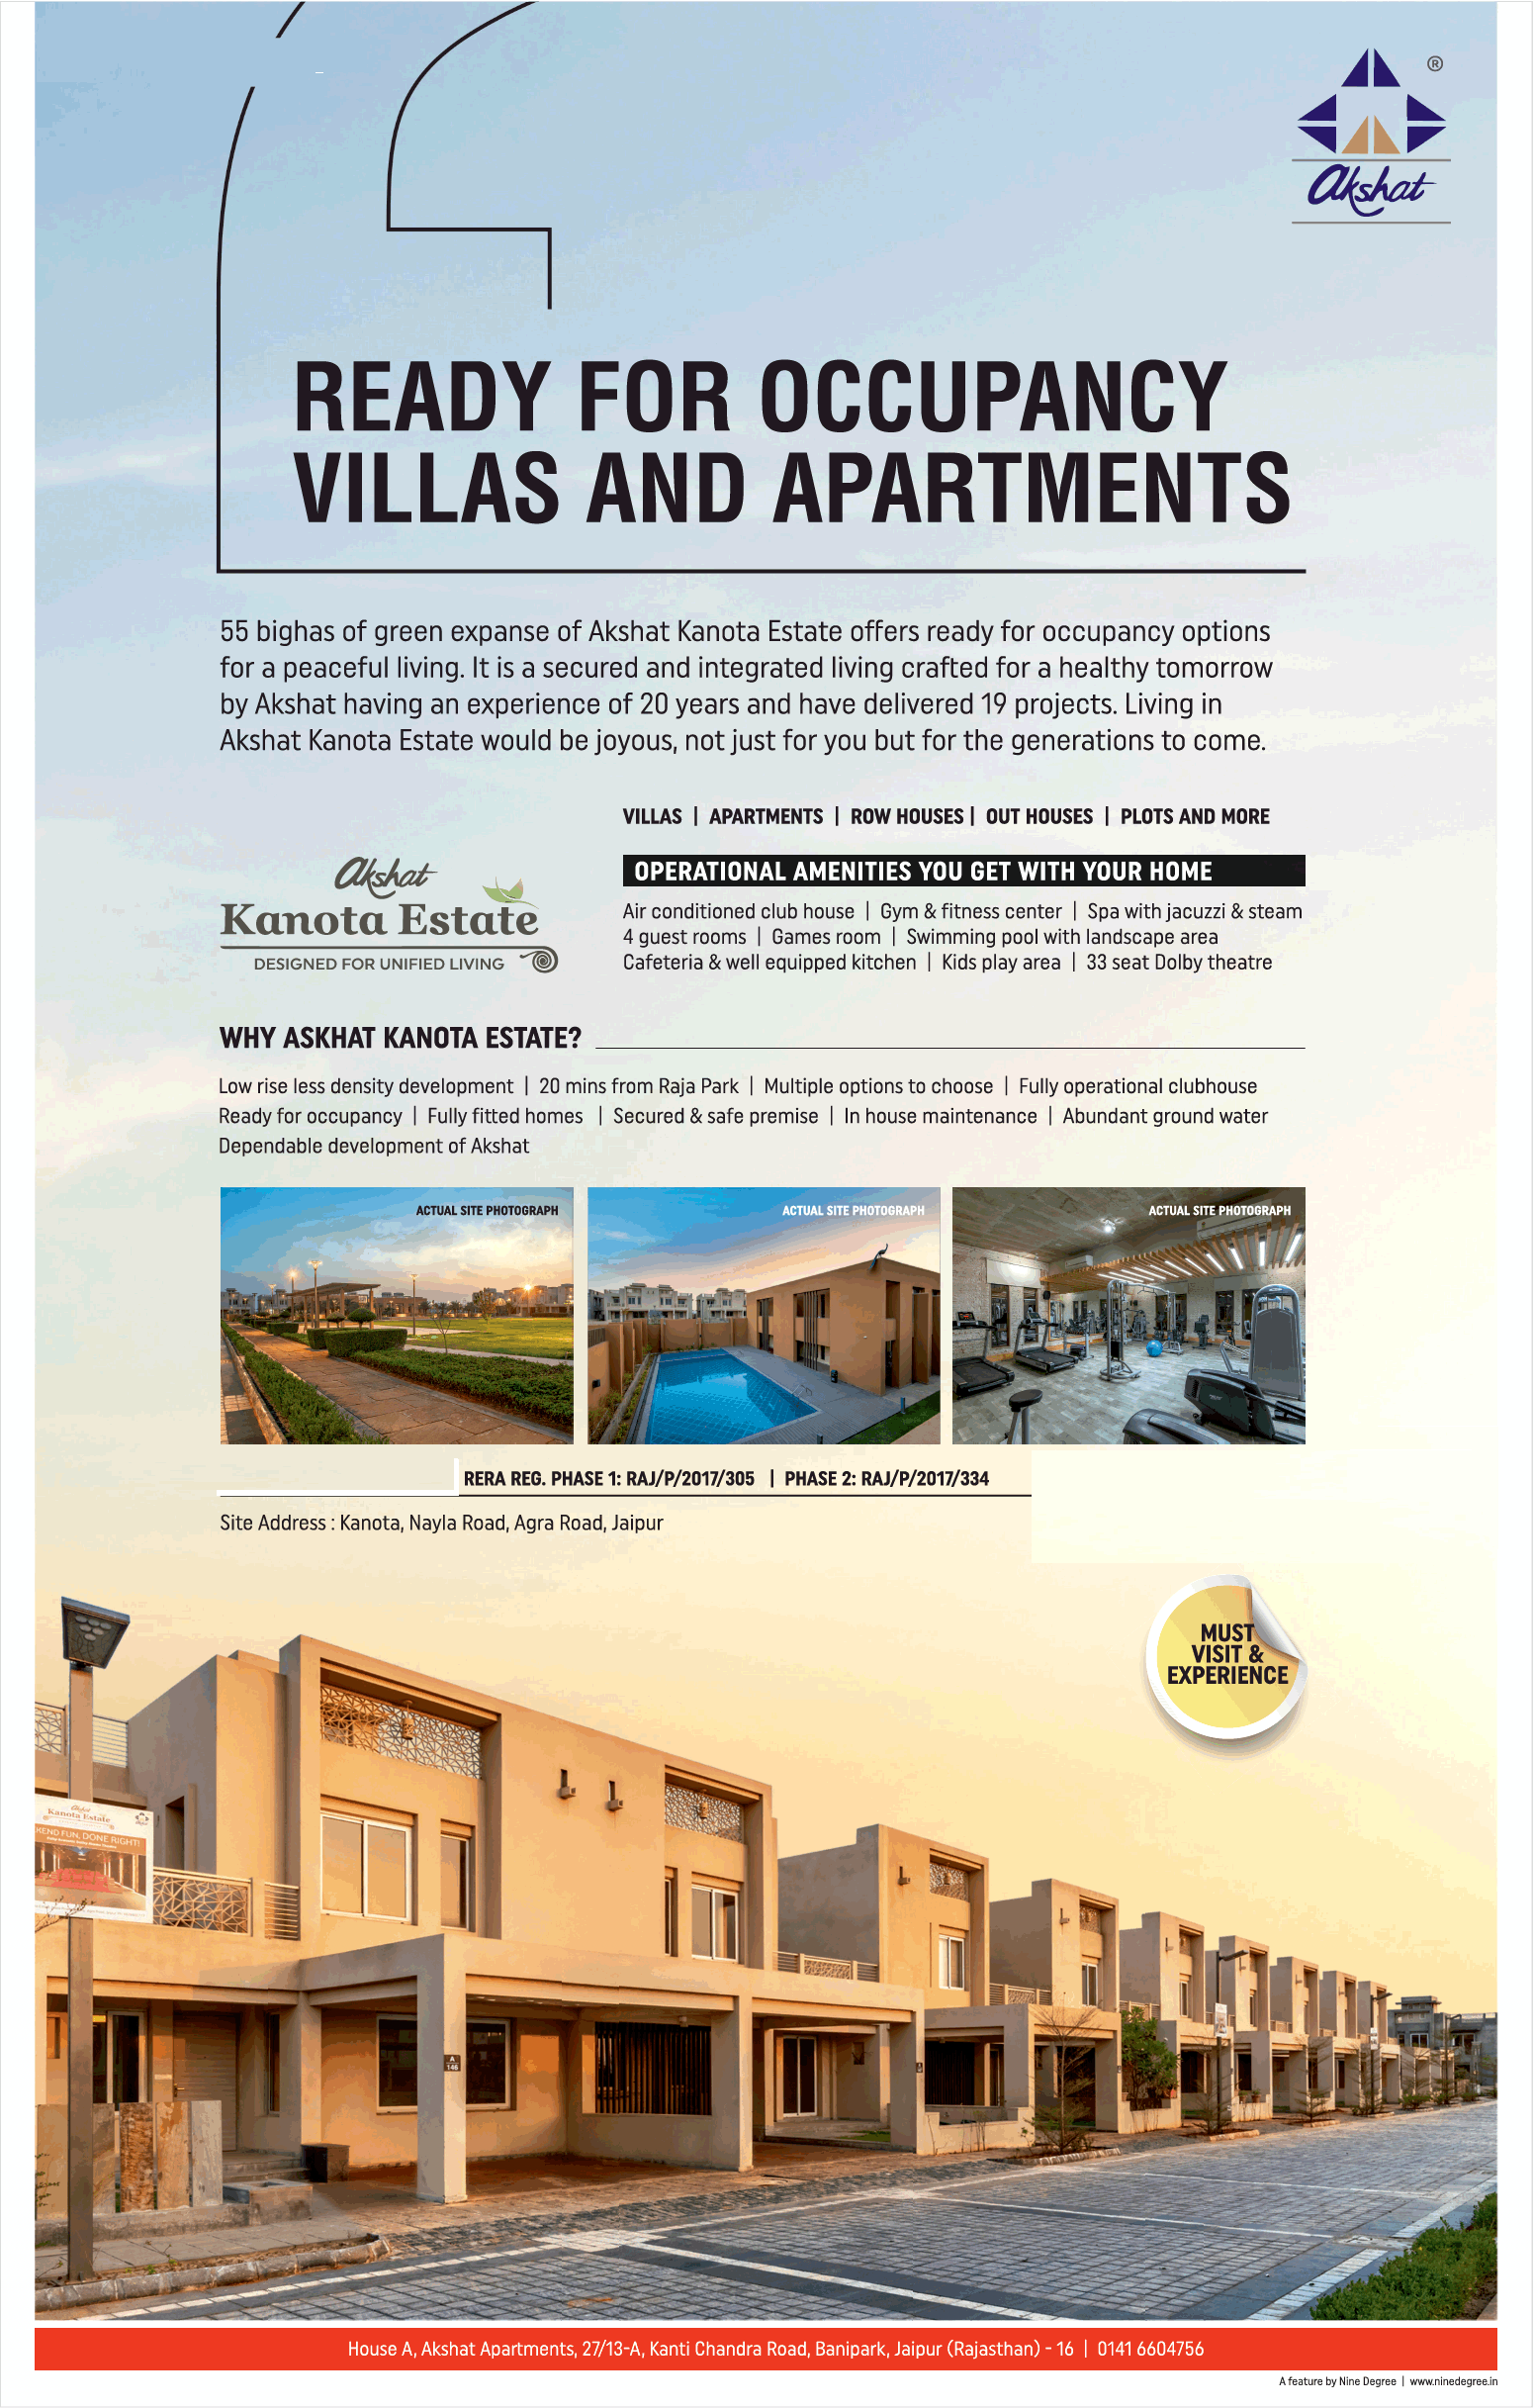 Ready for occupancy in villa and apartment at Akshat Kanota Estate, Jaipur